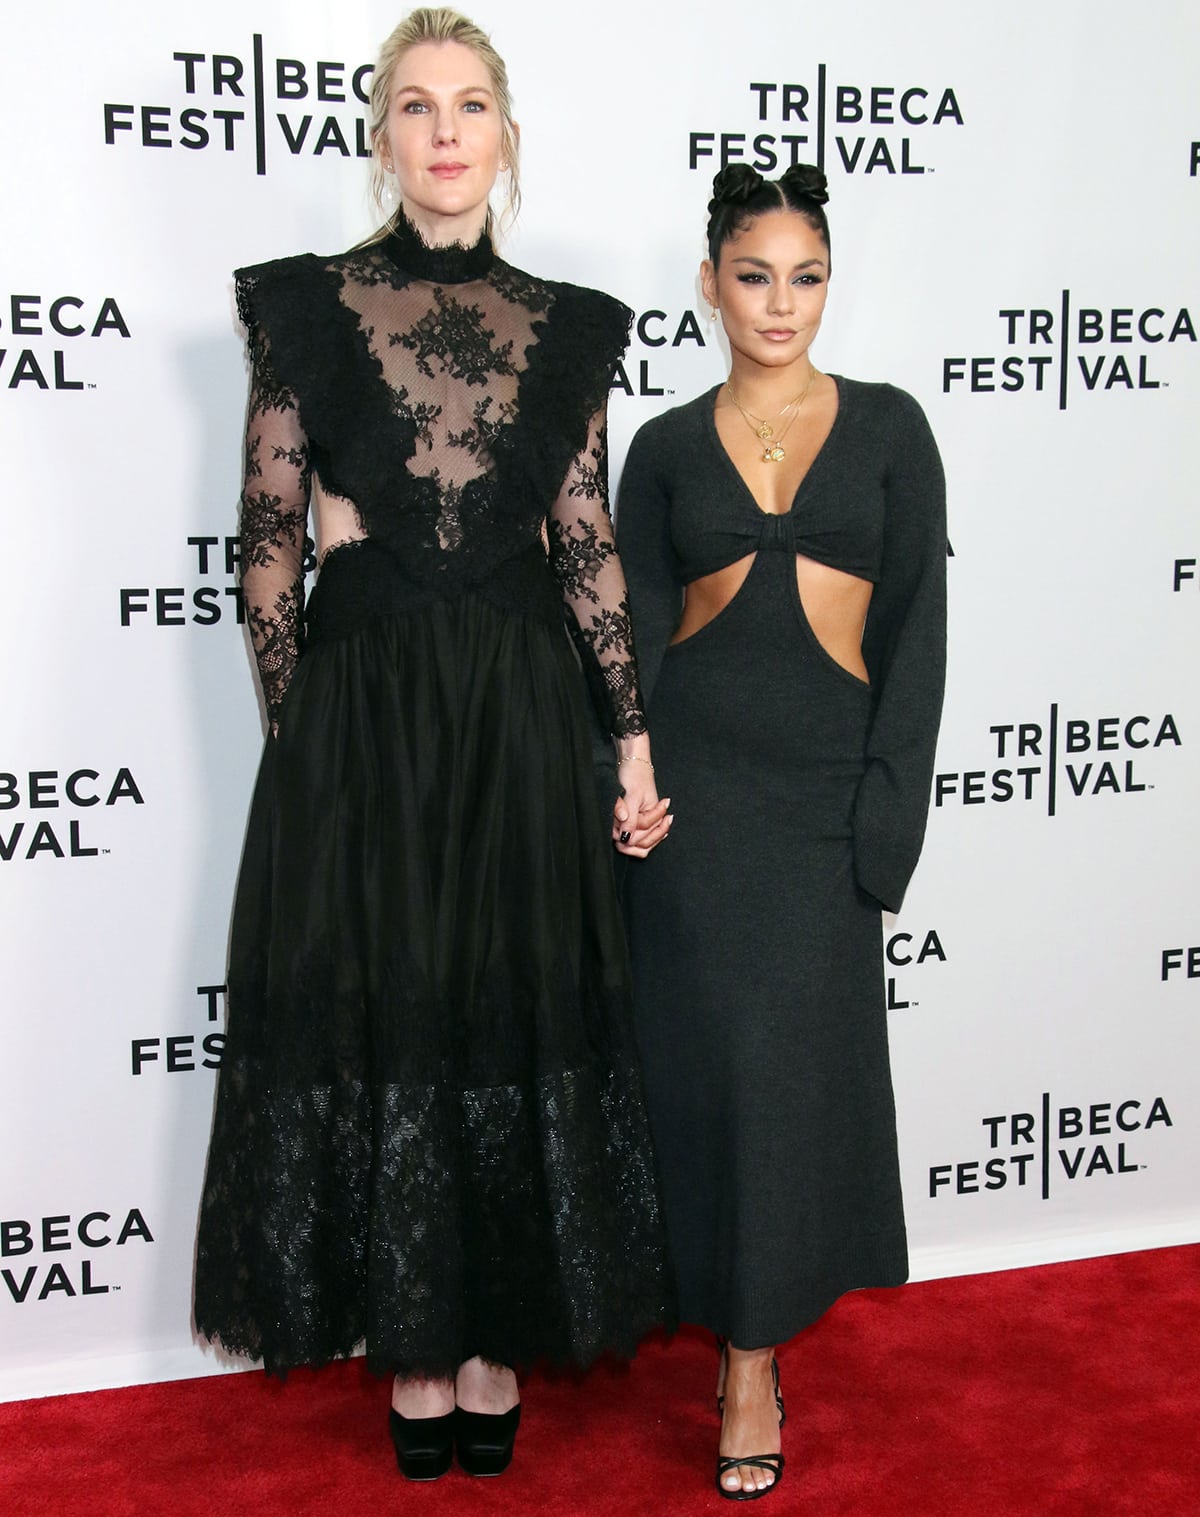 At the Tribeca Film Festival premiere of their new movie, Downtown Owl, held at the SVA Theatre in New York City on June 8, 2023, Vanessa Anne Hudgens stood at a height of 5 feet 1 inch (154.9 cm), while Lily Rabe measured 5 feet 8 inches (172.7 cm) in height, showcasing a notable height difference between the two actresses